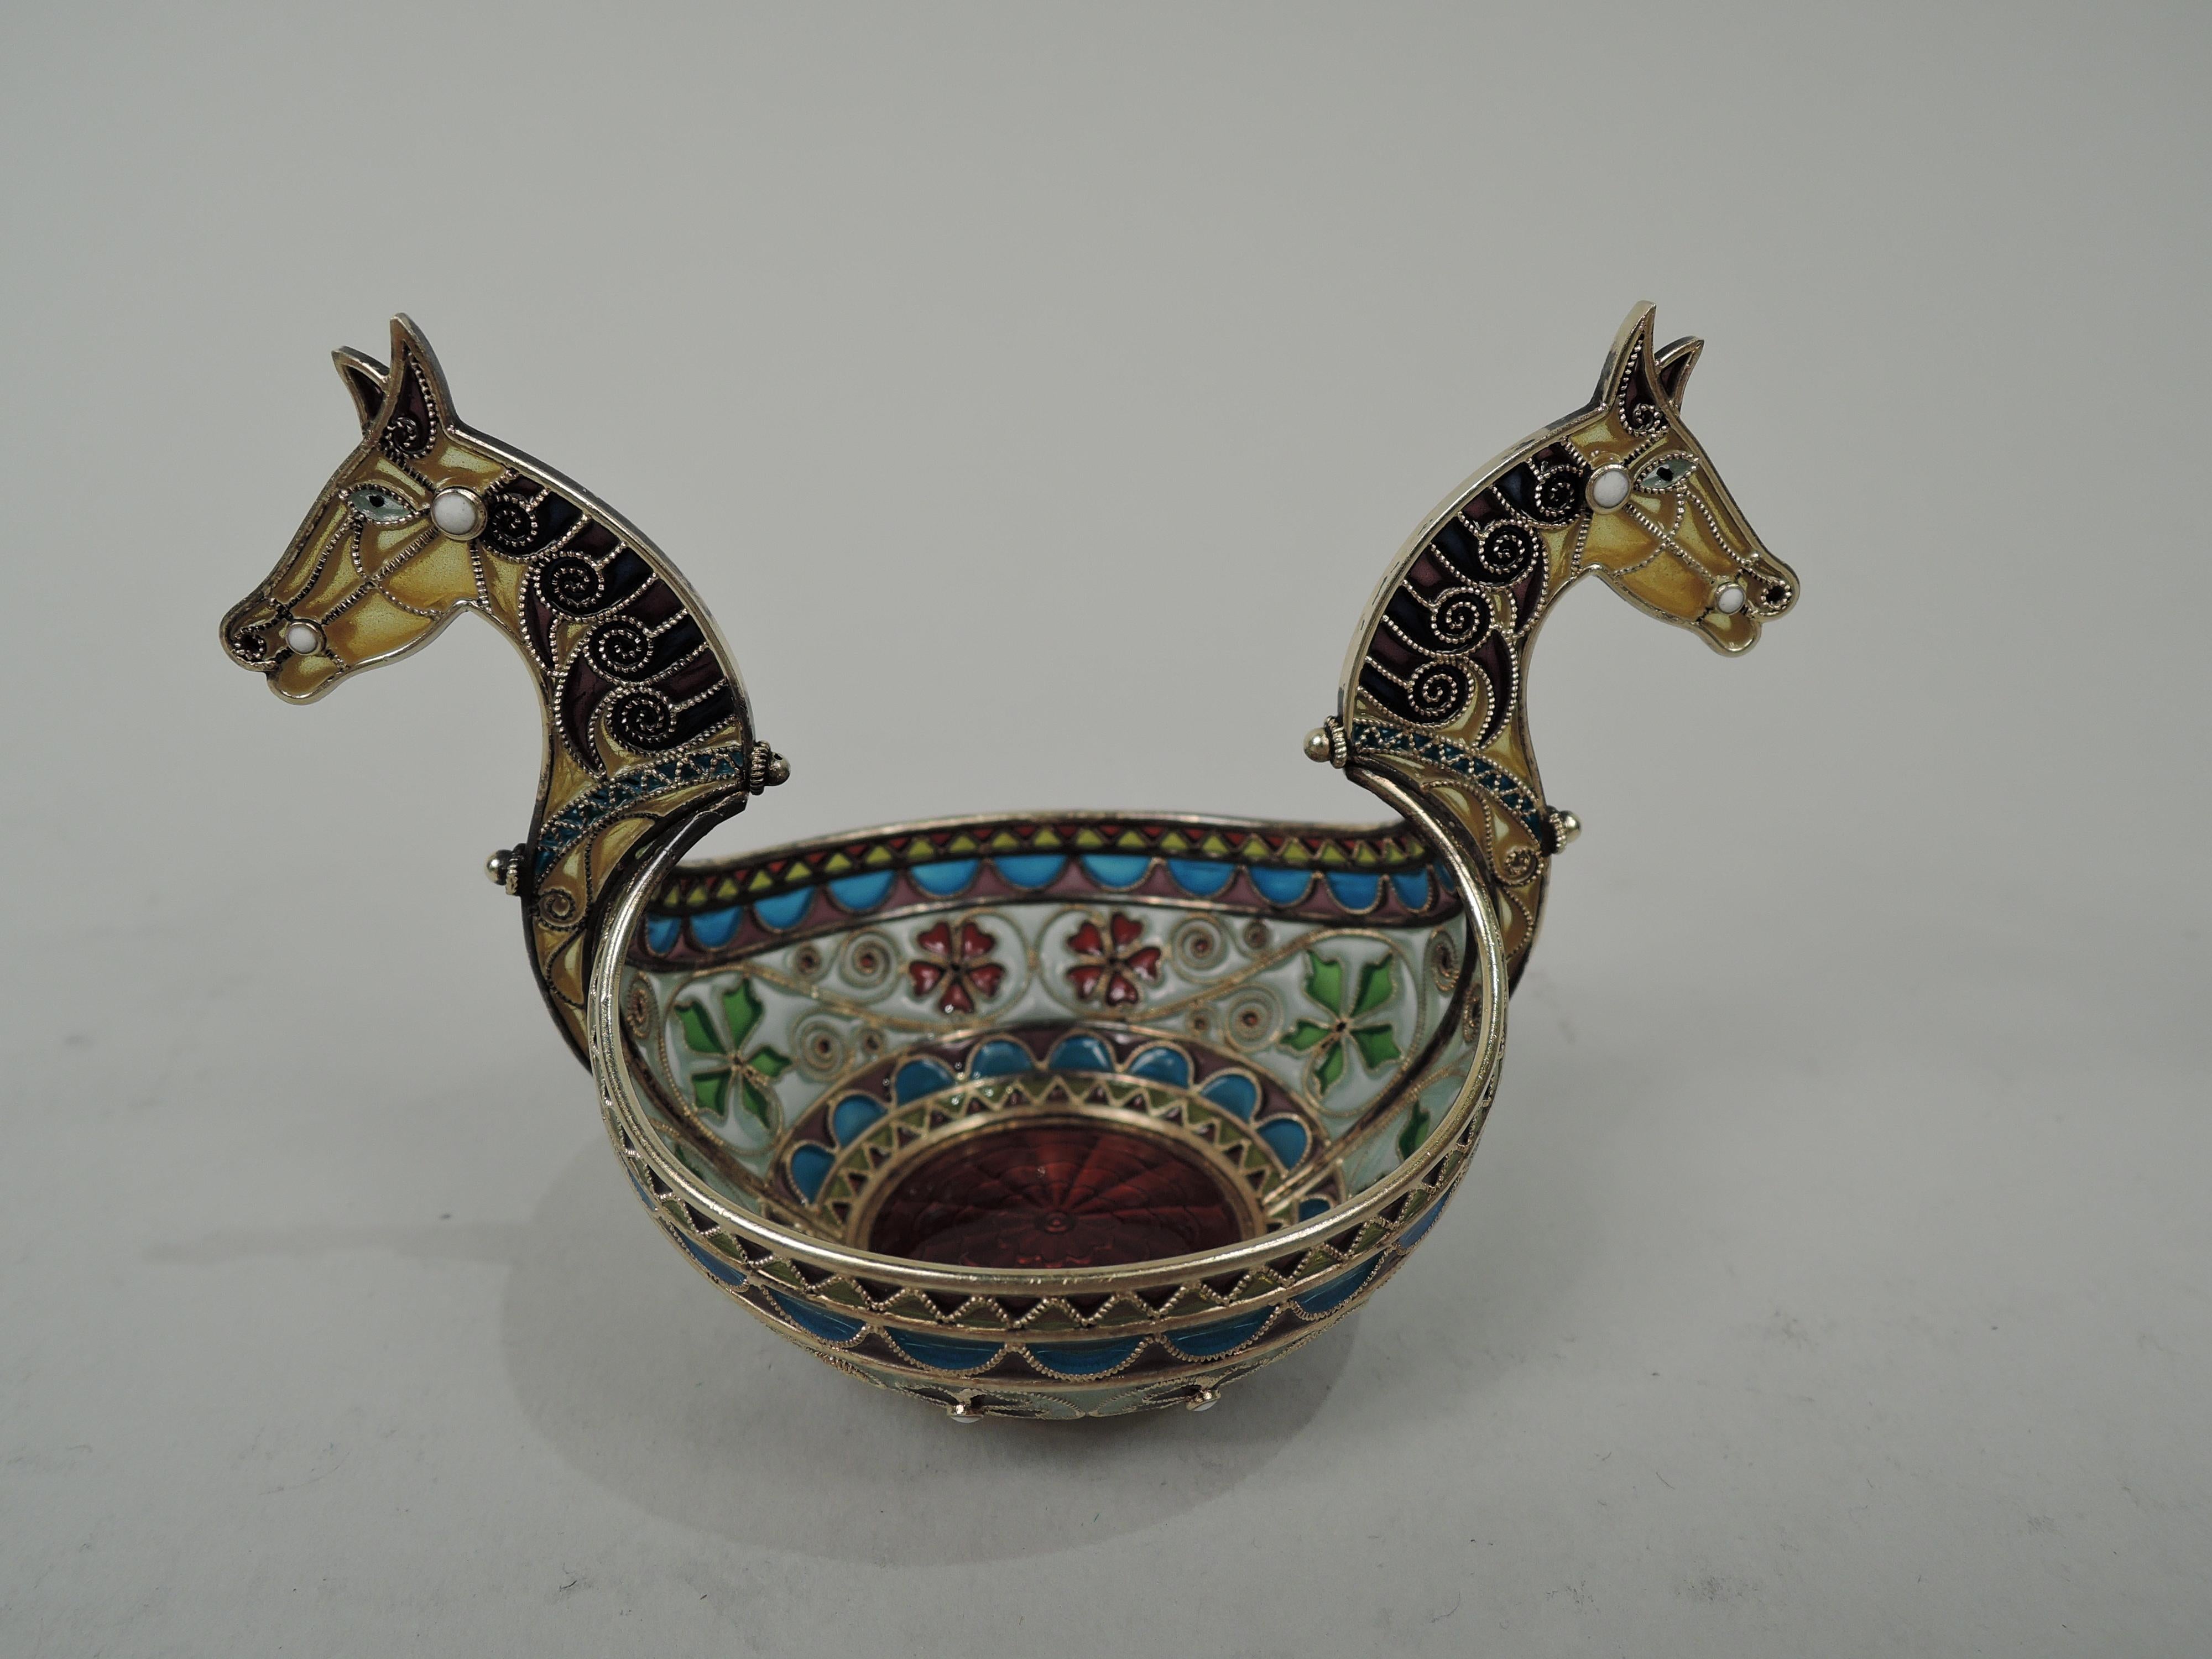 Set of 3 plique à jour enamel and gilt 930 silver open salts. Made by Marius Hammer in Norway, ca 1910. Each: Round with curved sides. Well guilloche enamel (two red, one blue). Horse bust side handles. Bands of stylized plant and geometric